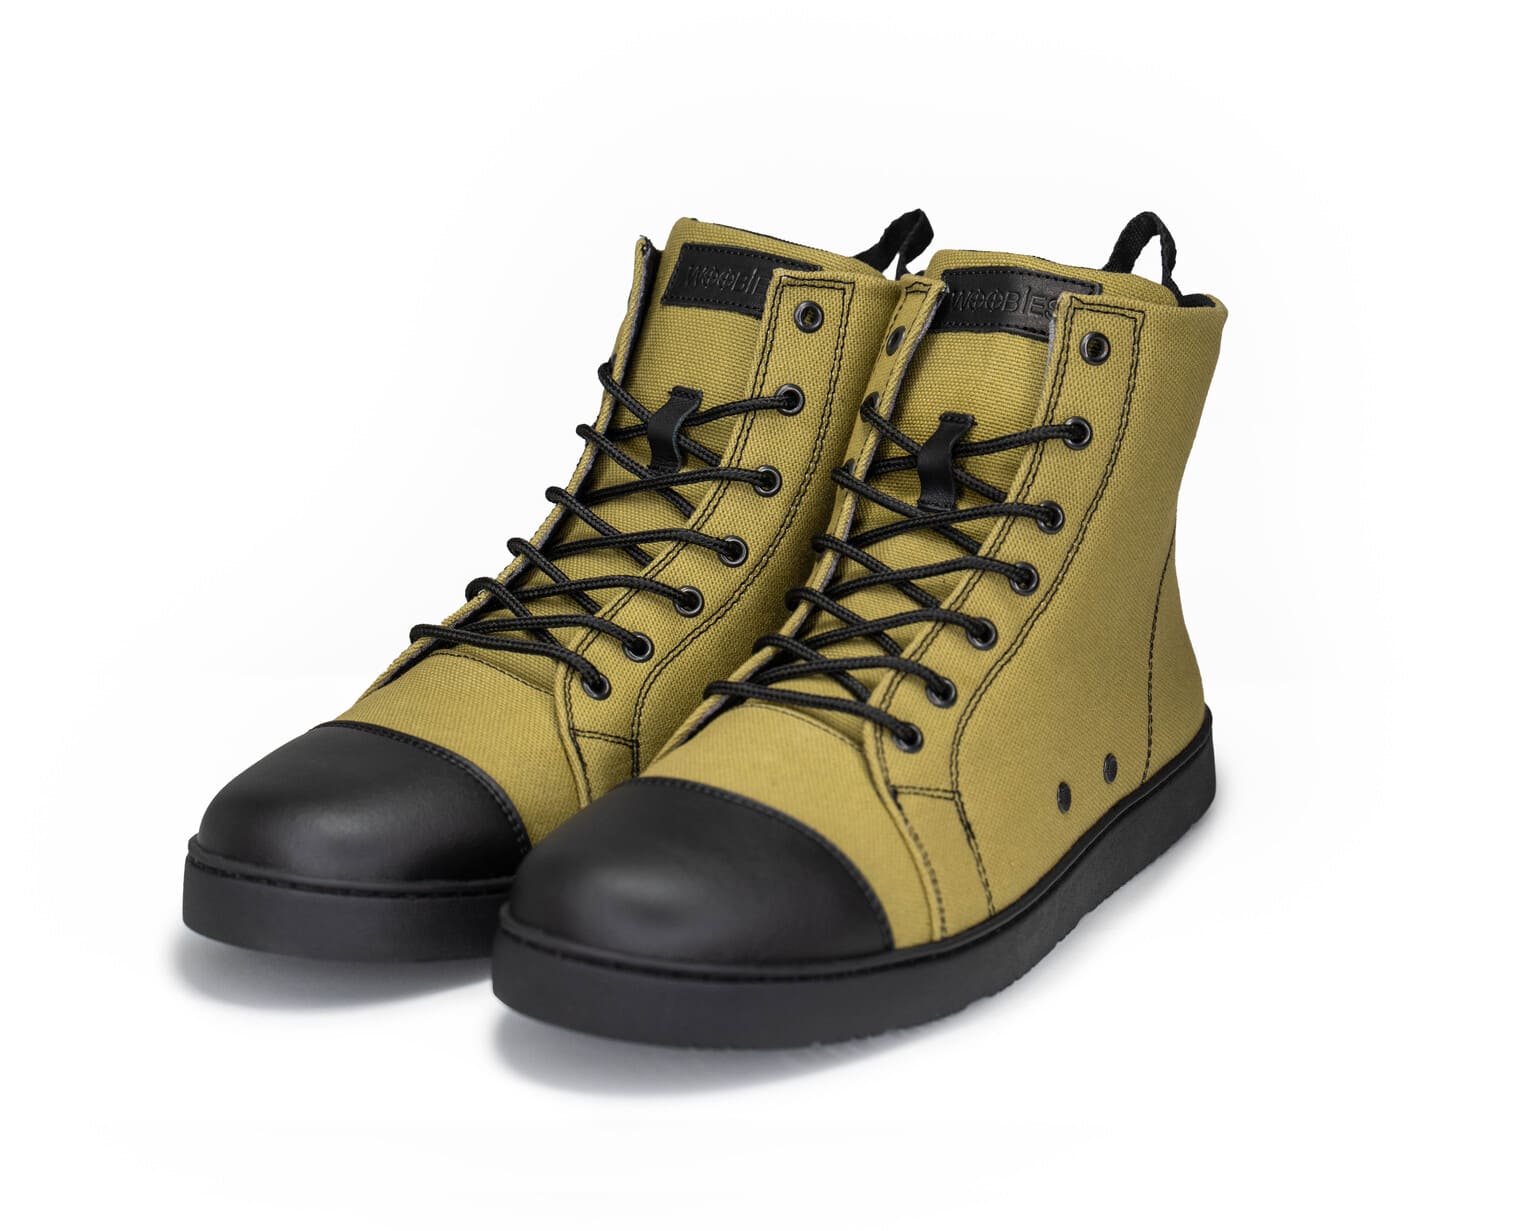 yellow-green canvas boots.